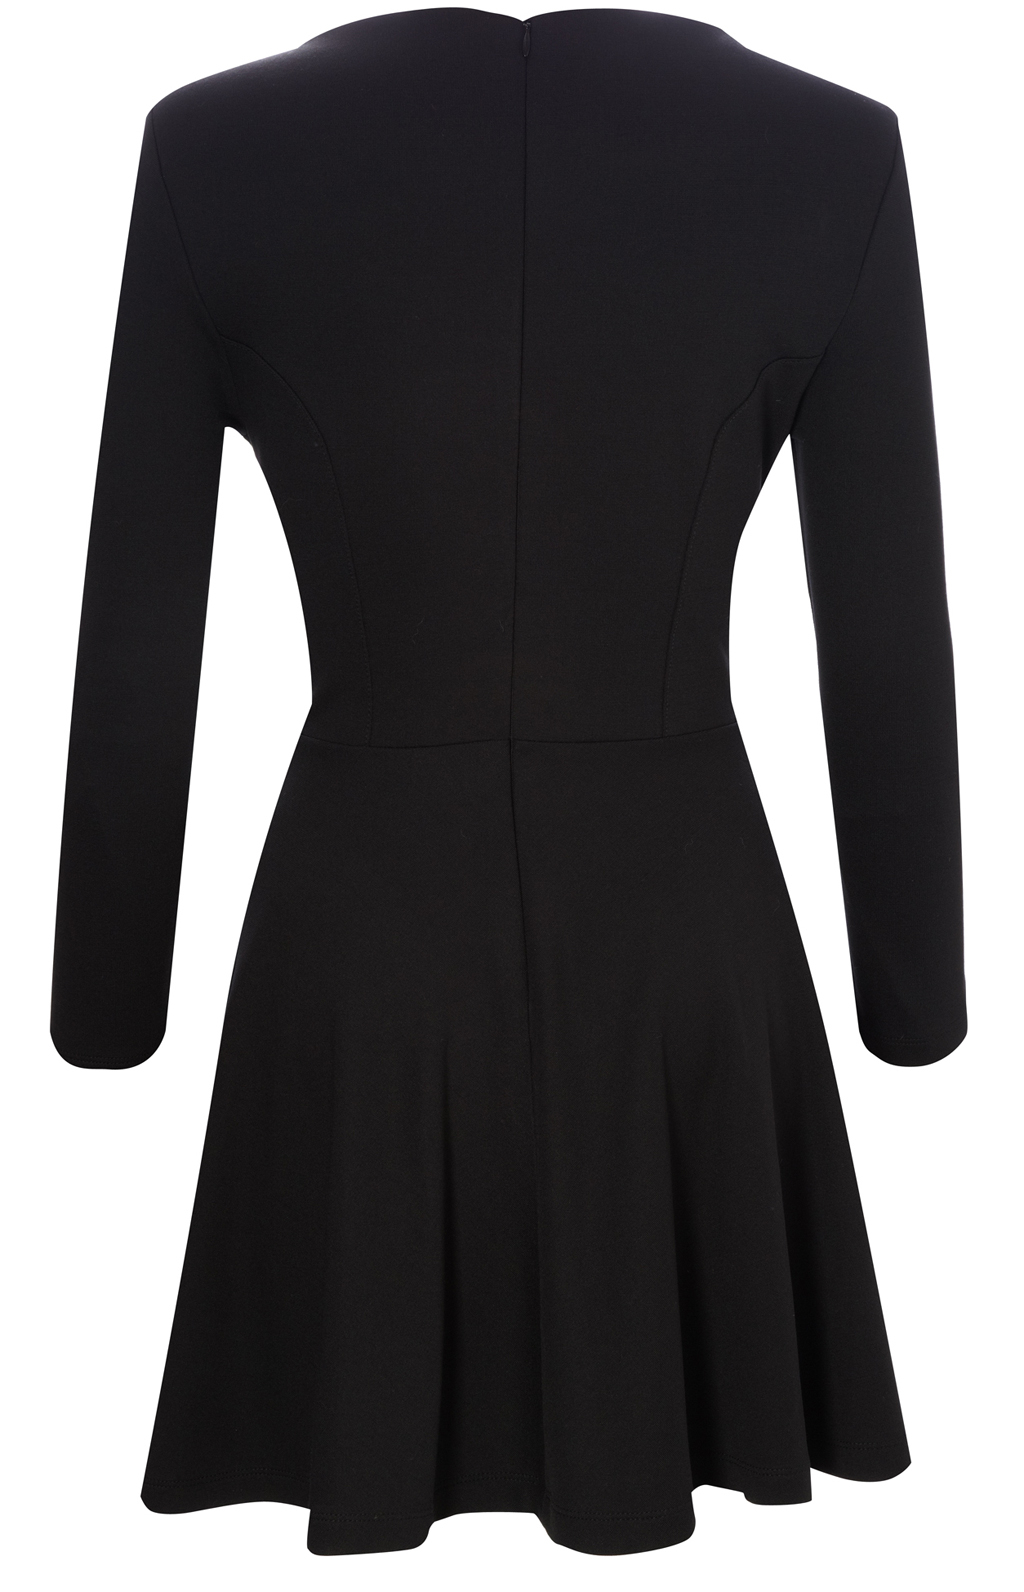 French Connection Valentine Viscose Flare Dress in Black - Lyst